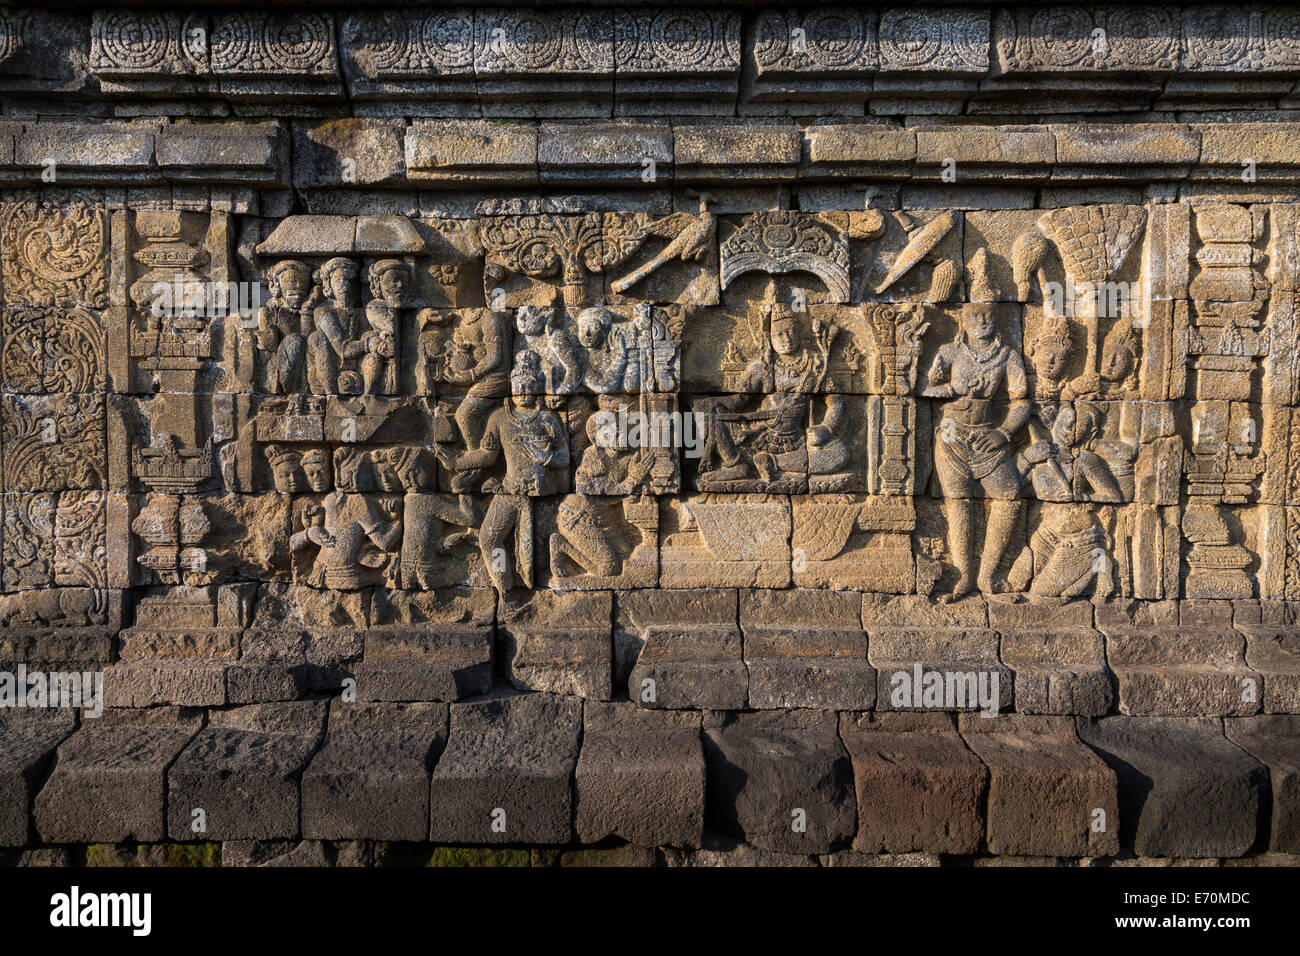 Borobudur, Java, Indonesia.  Bas-relief Stone Carving, North Face.  Scenes from the Buddha's Life Show him Seeking Enlightenment Stock Photo